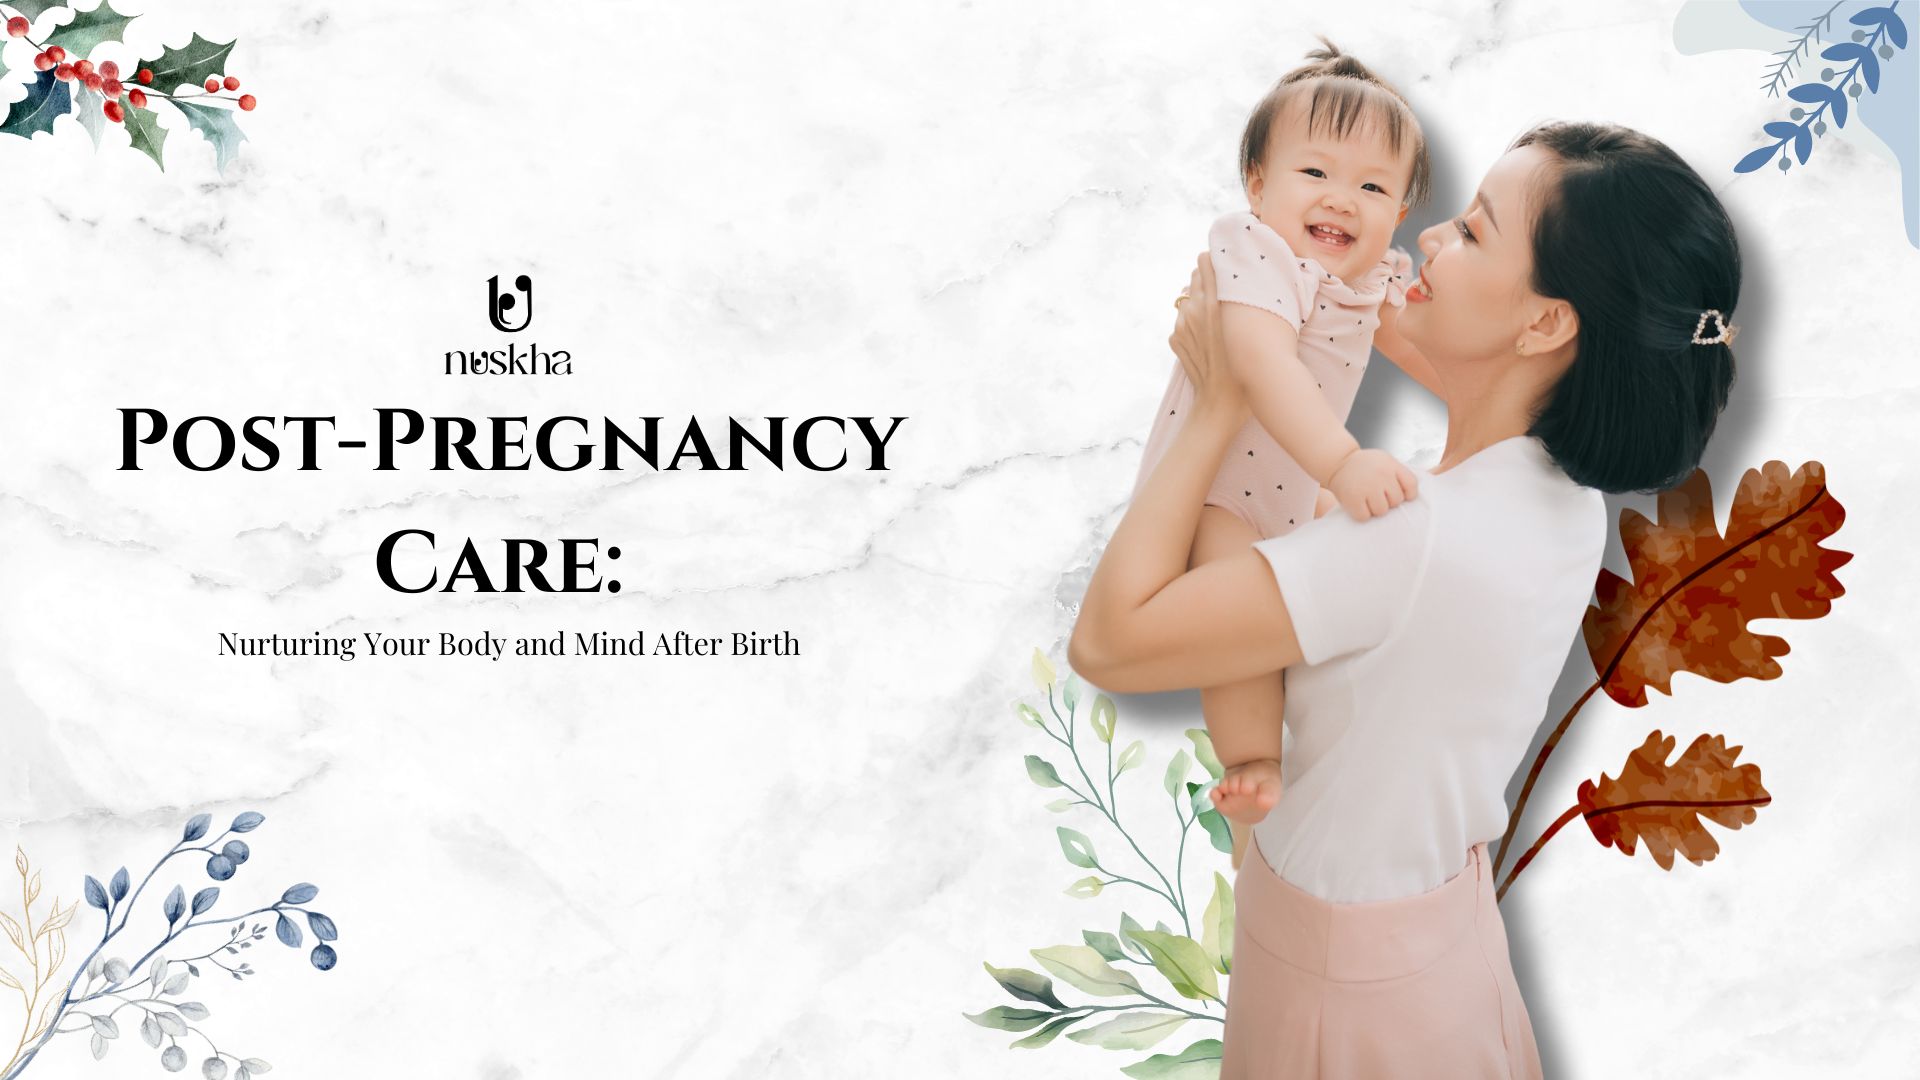 Post-Pregnancy Care: Nurturing Your Body and Mind After Birth